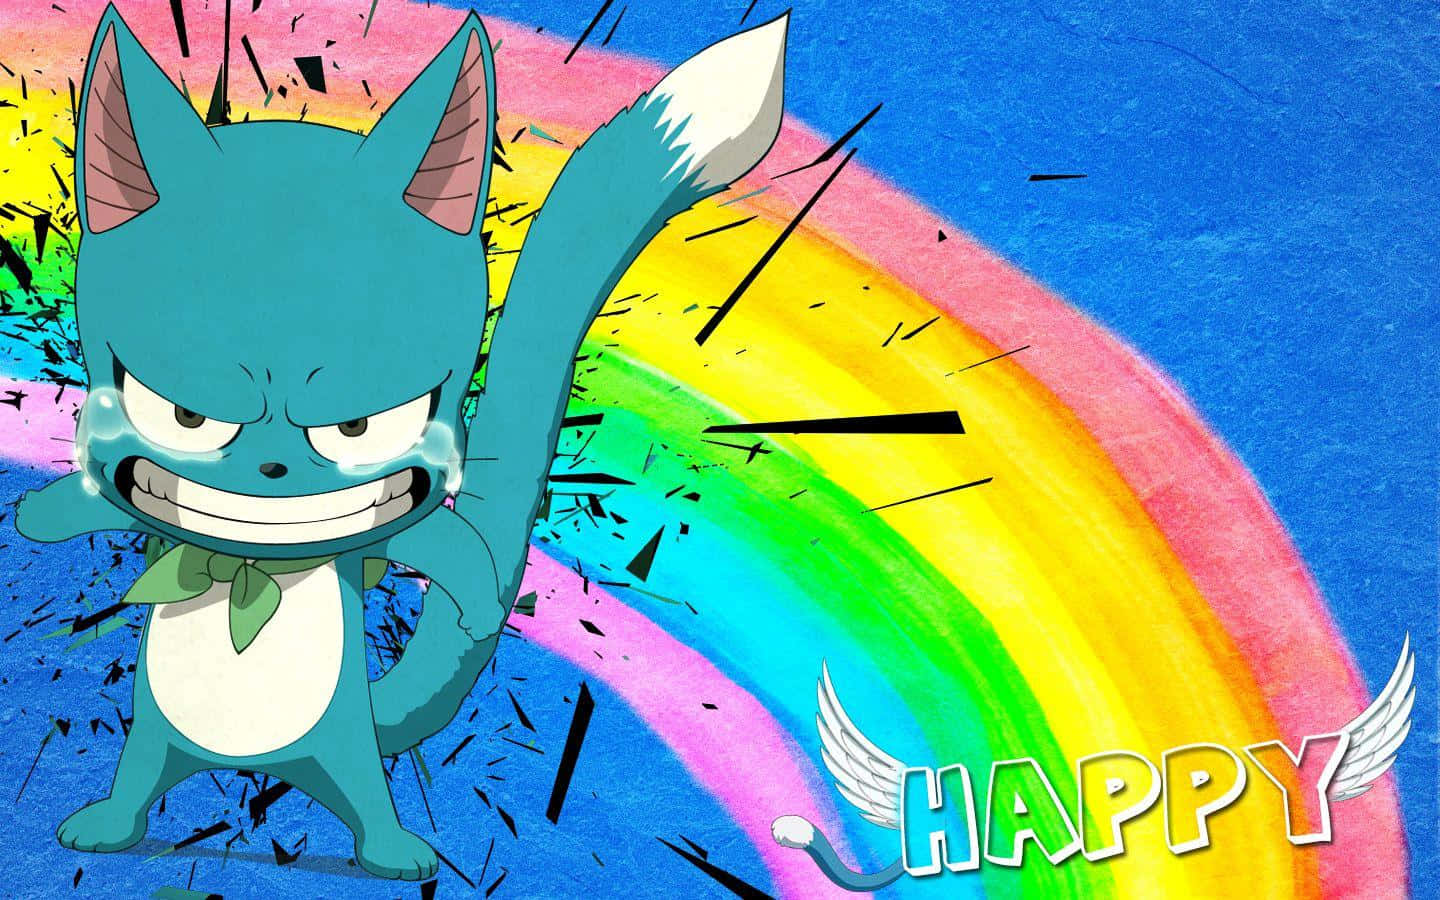 Happy, the flying blue cat, soaring over the Fairy Tail world Wallpaper